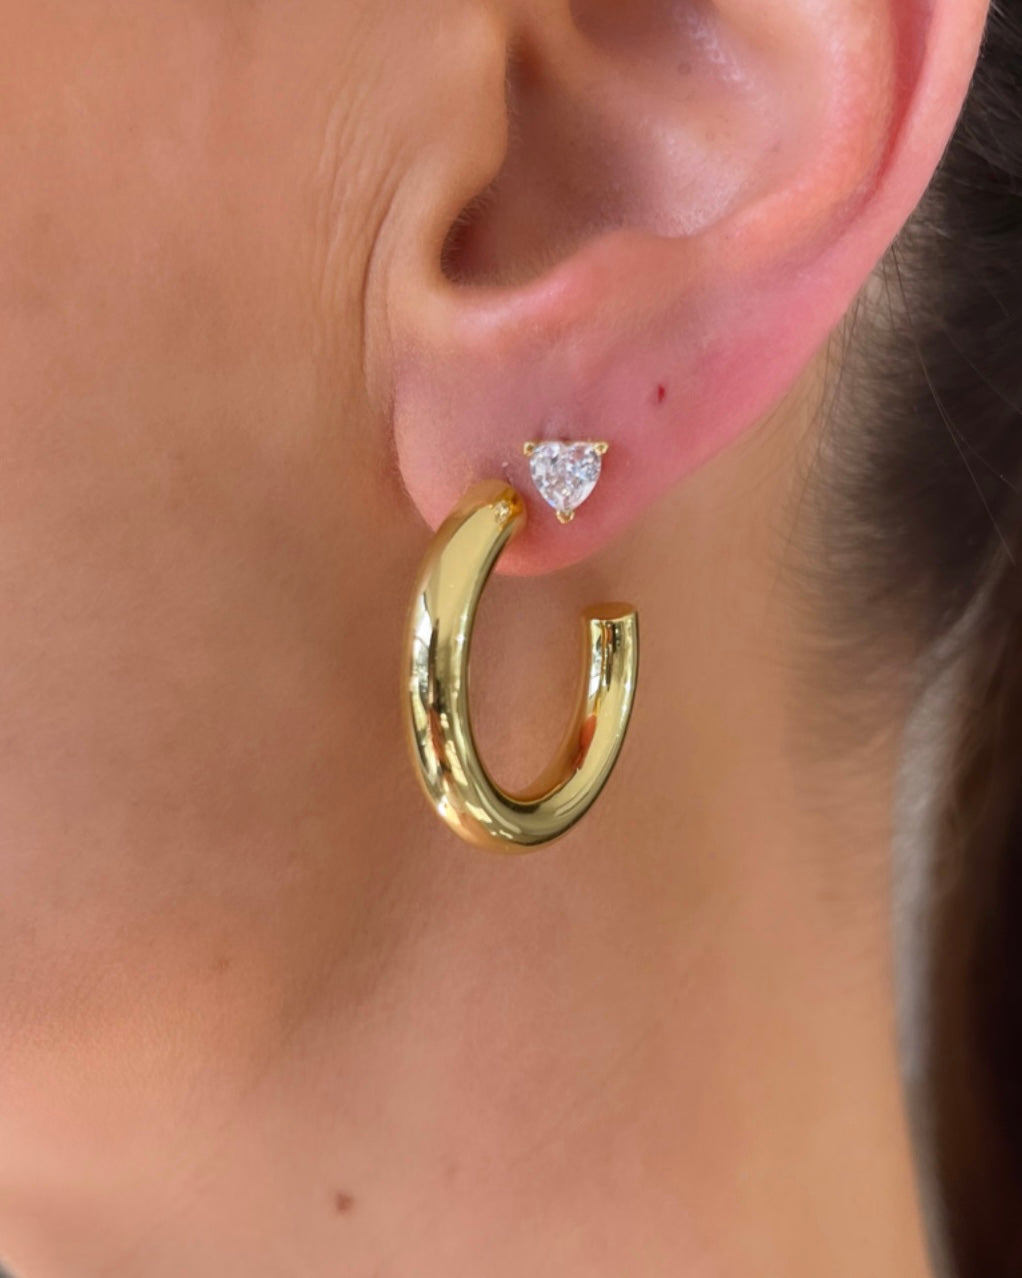 Large Chunky Gold Hoops